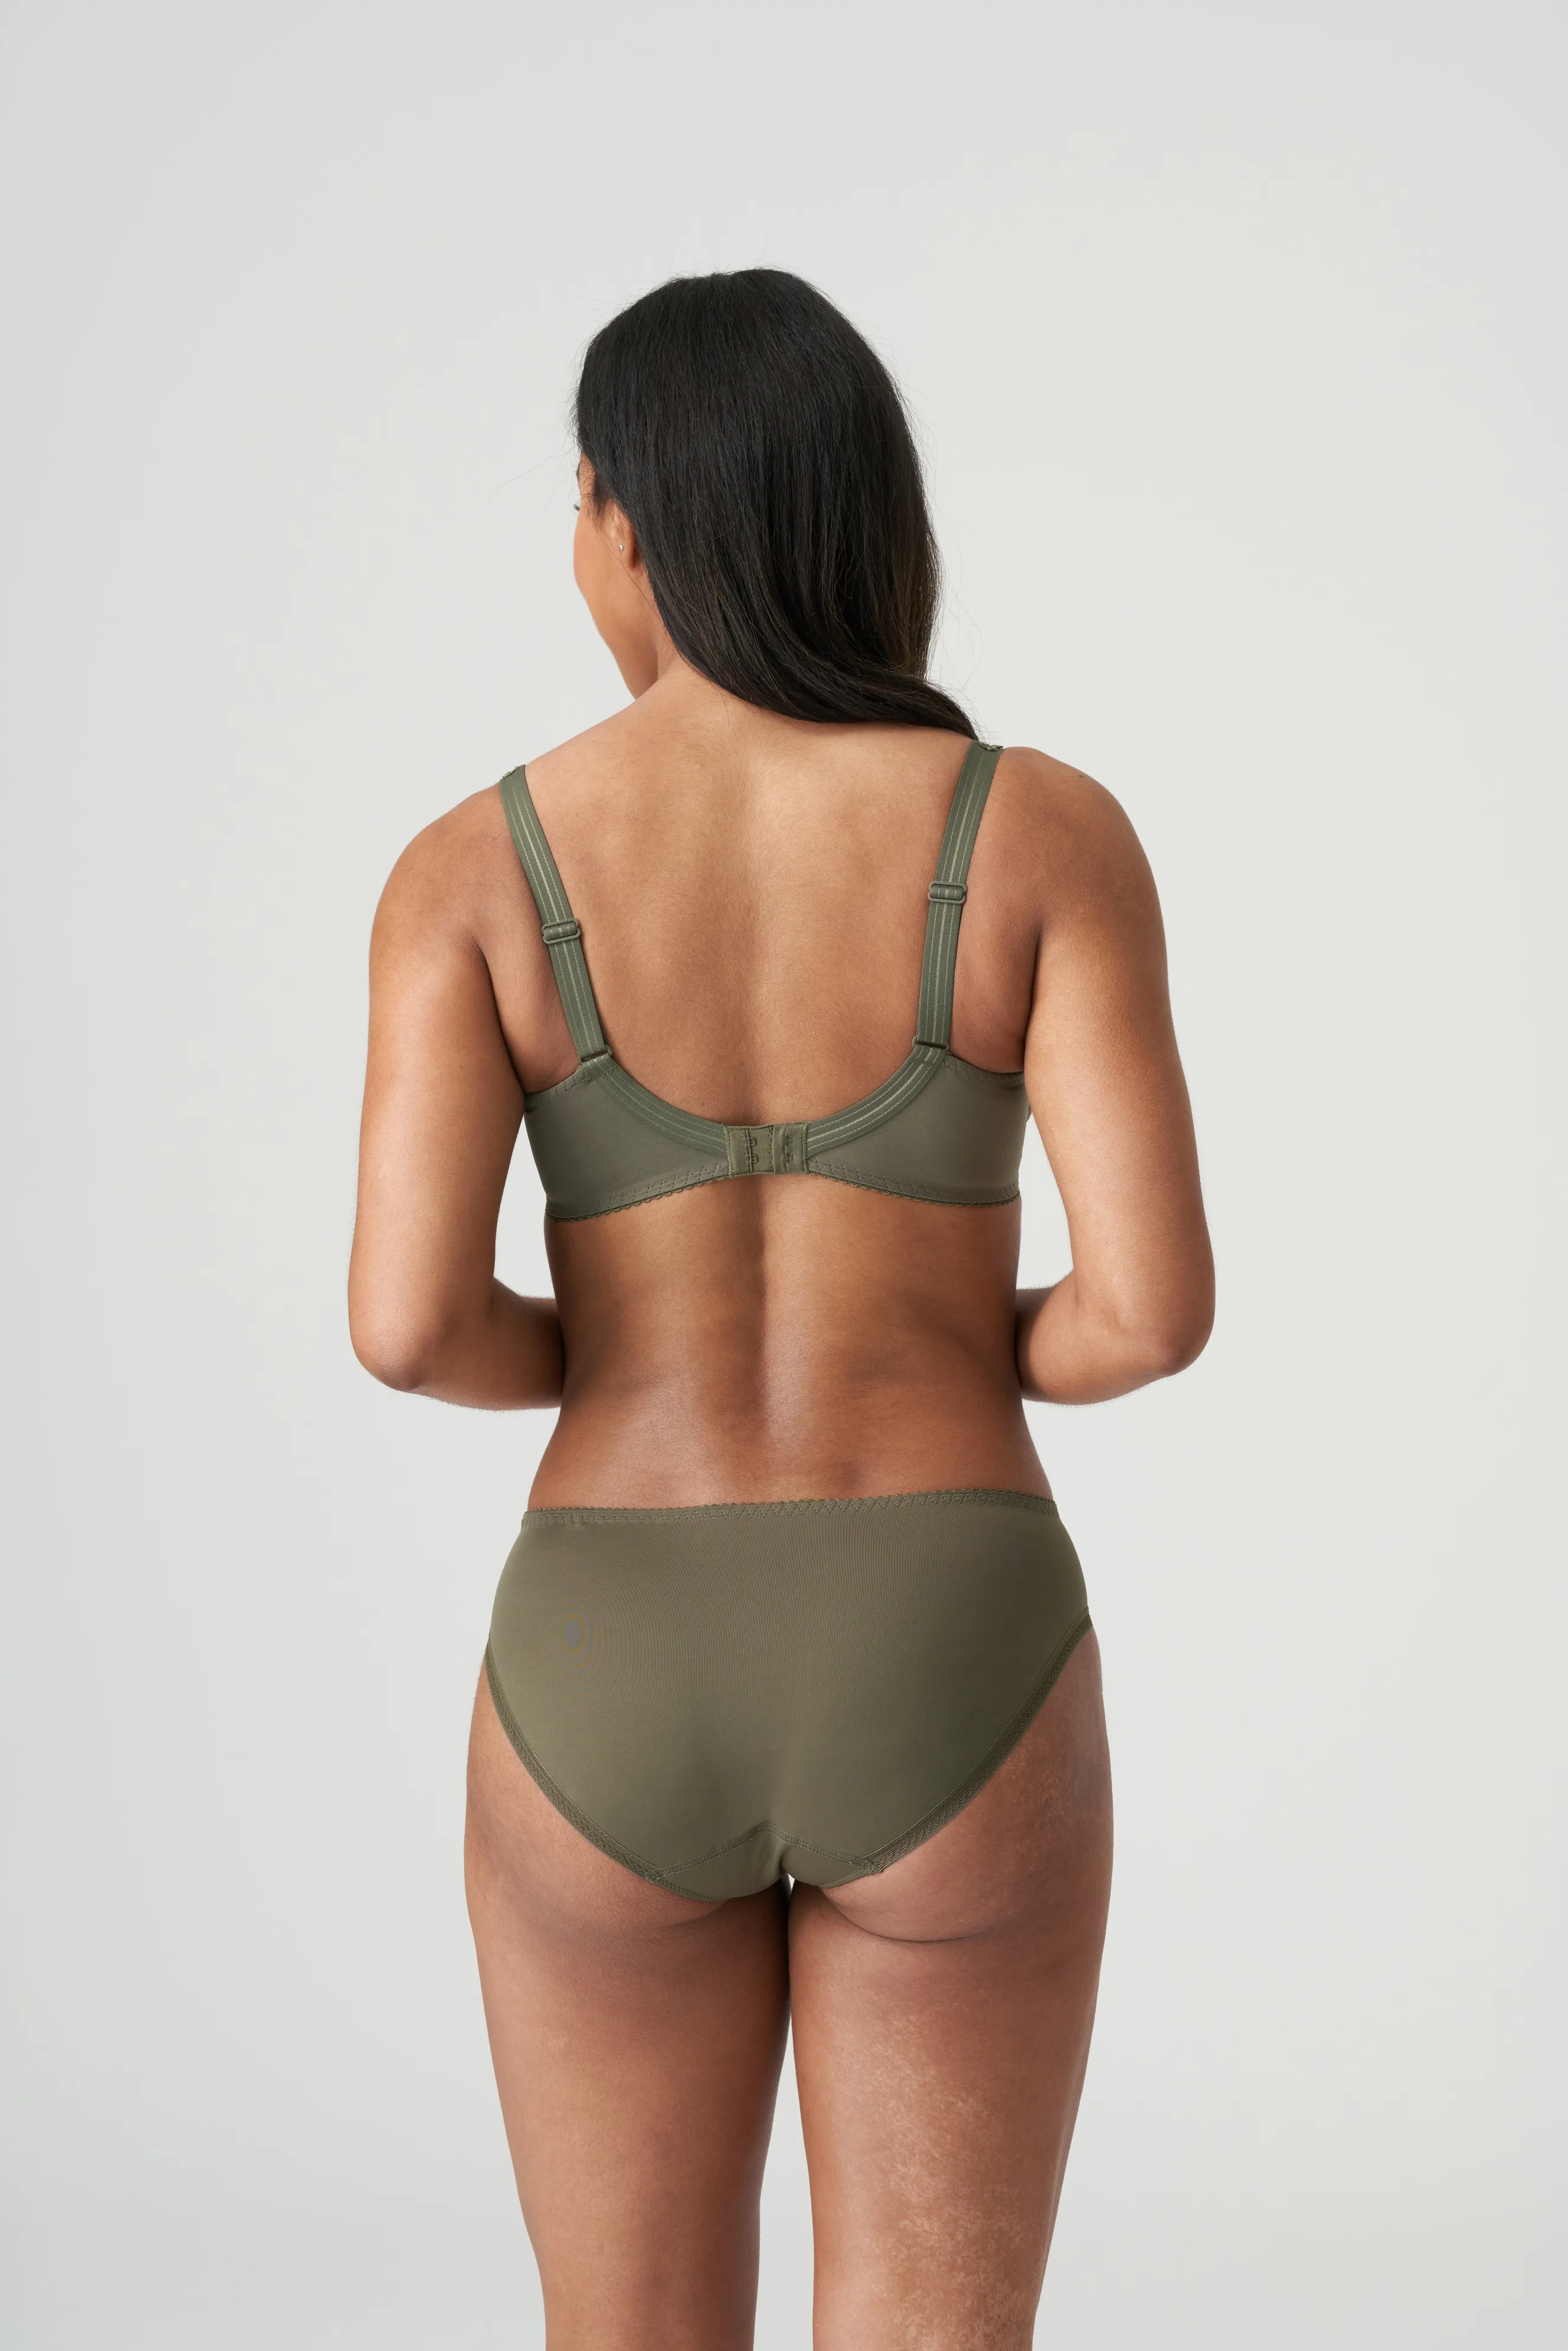 Submarine, algae green, and a vaccine! Pace Perfect bra (10) in